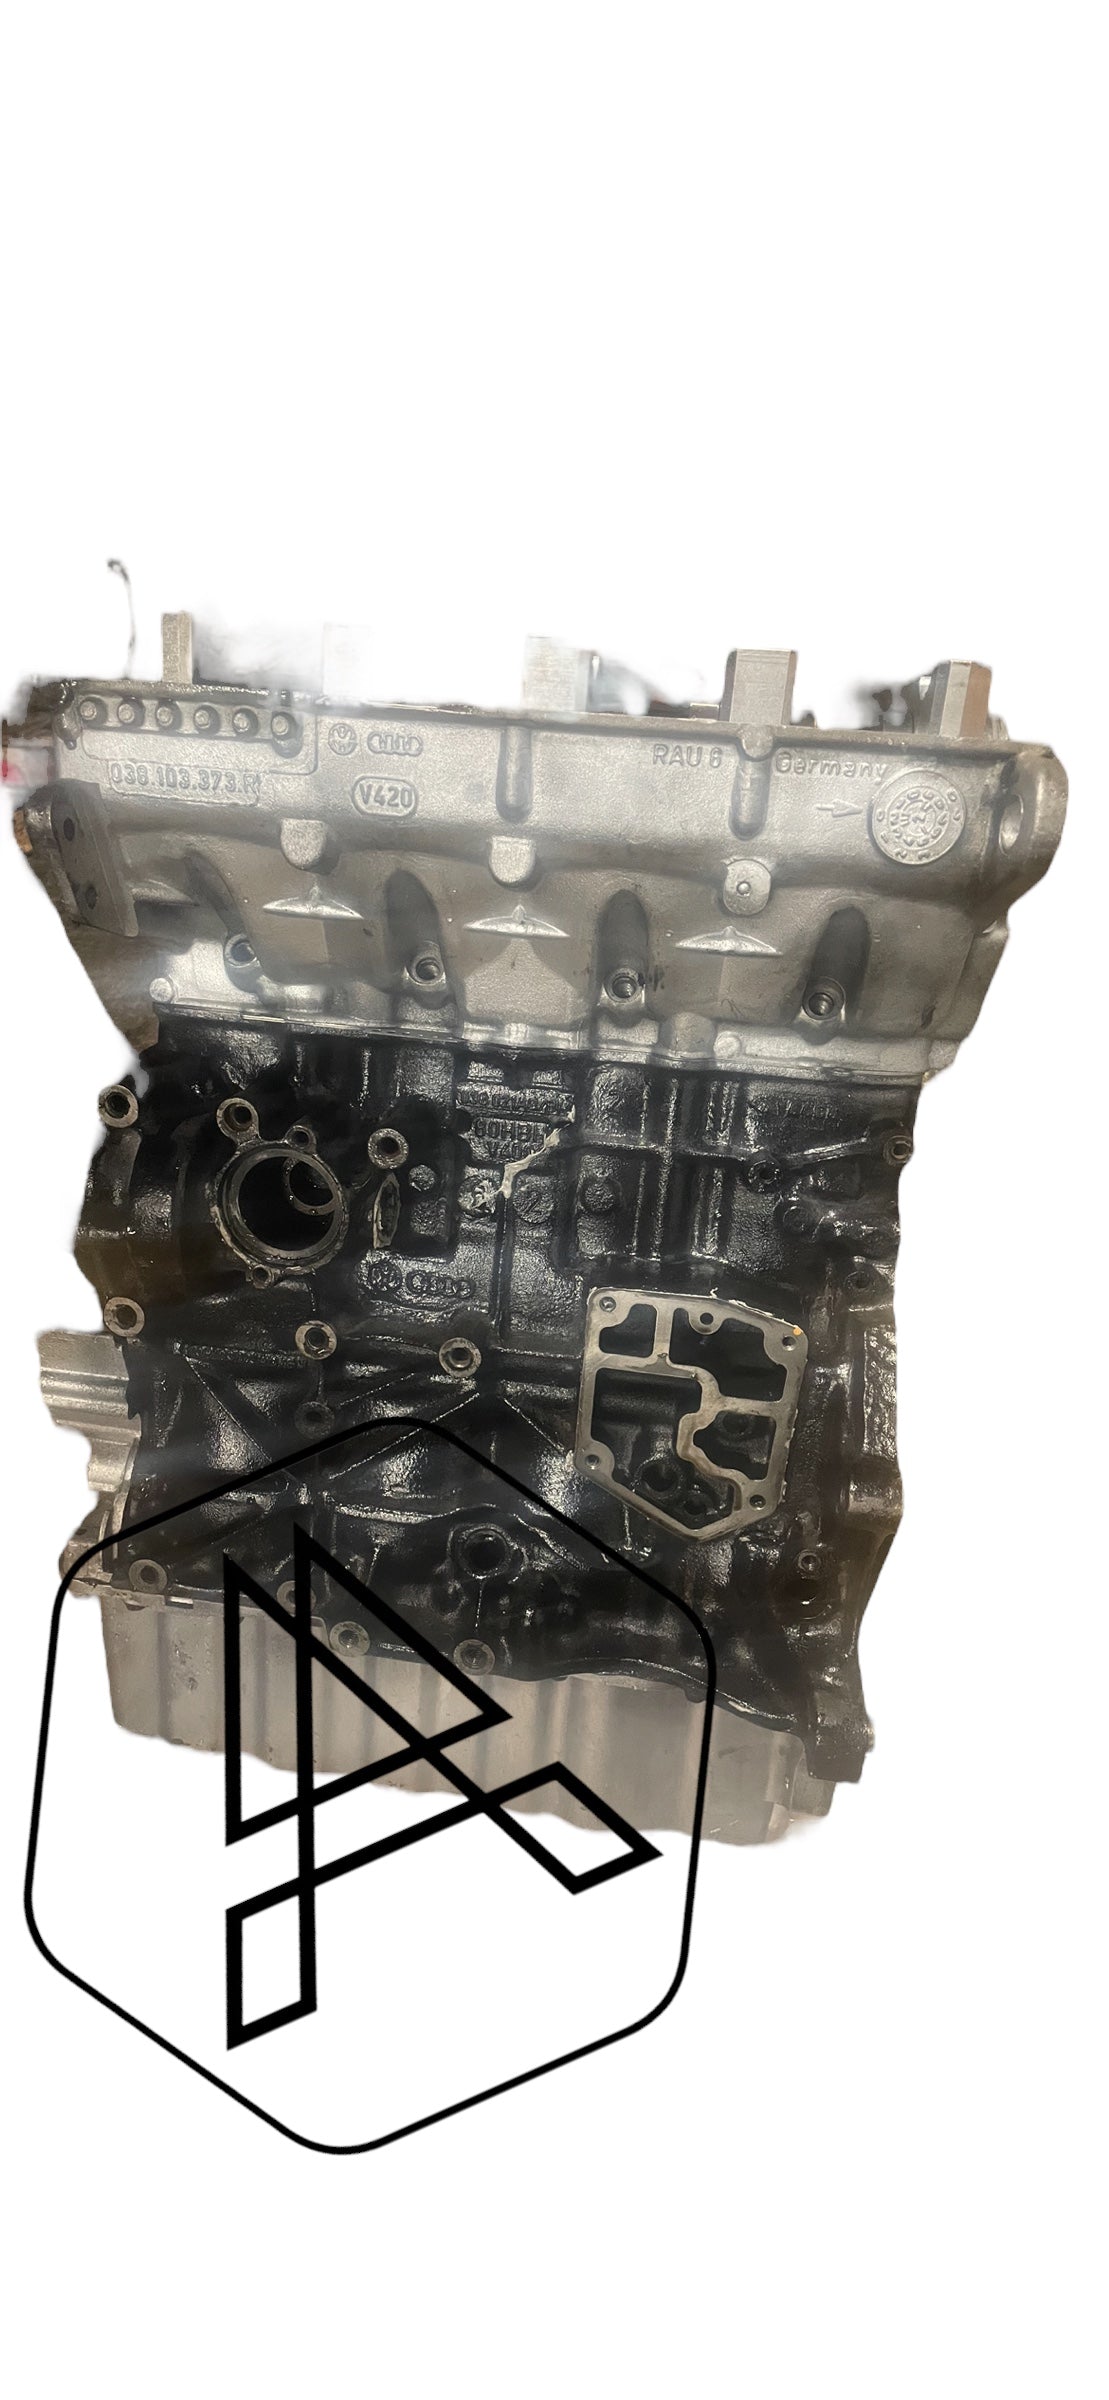 1.9 TDi VW brs/brr engine Reconditioned